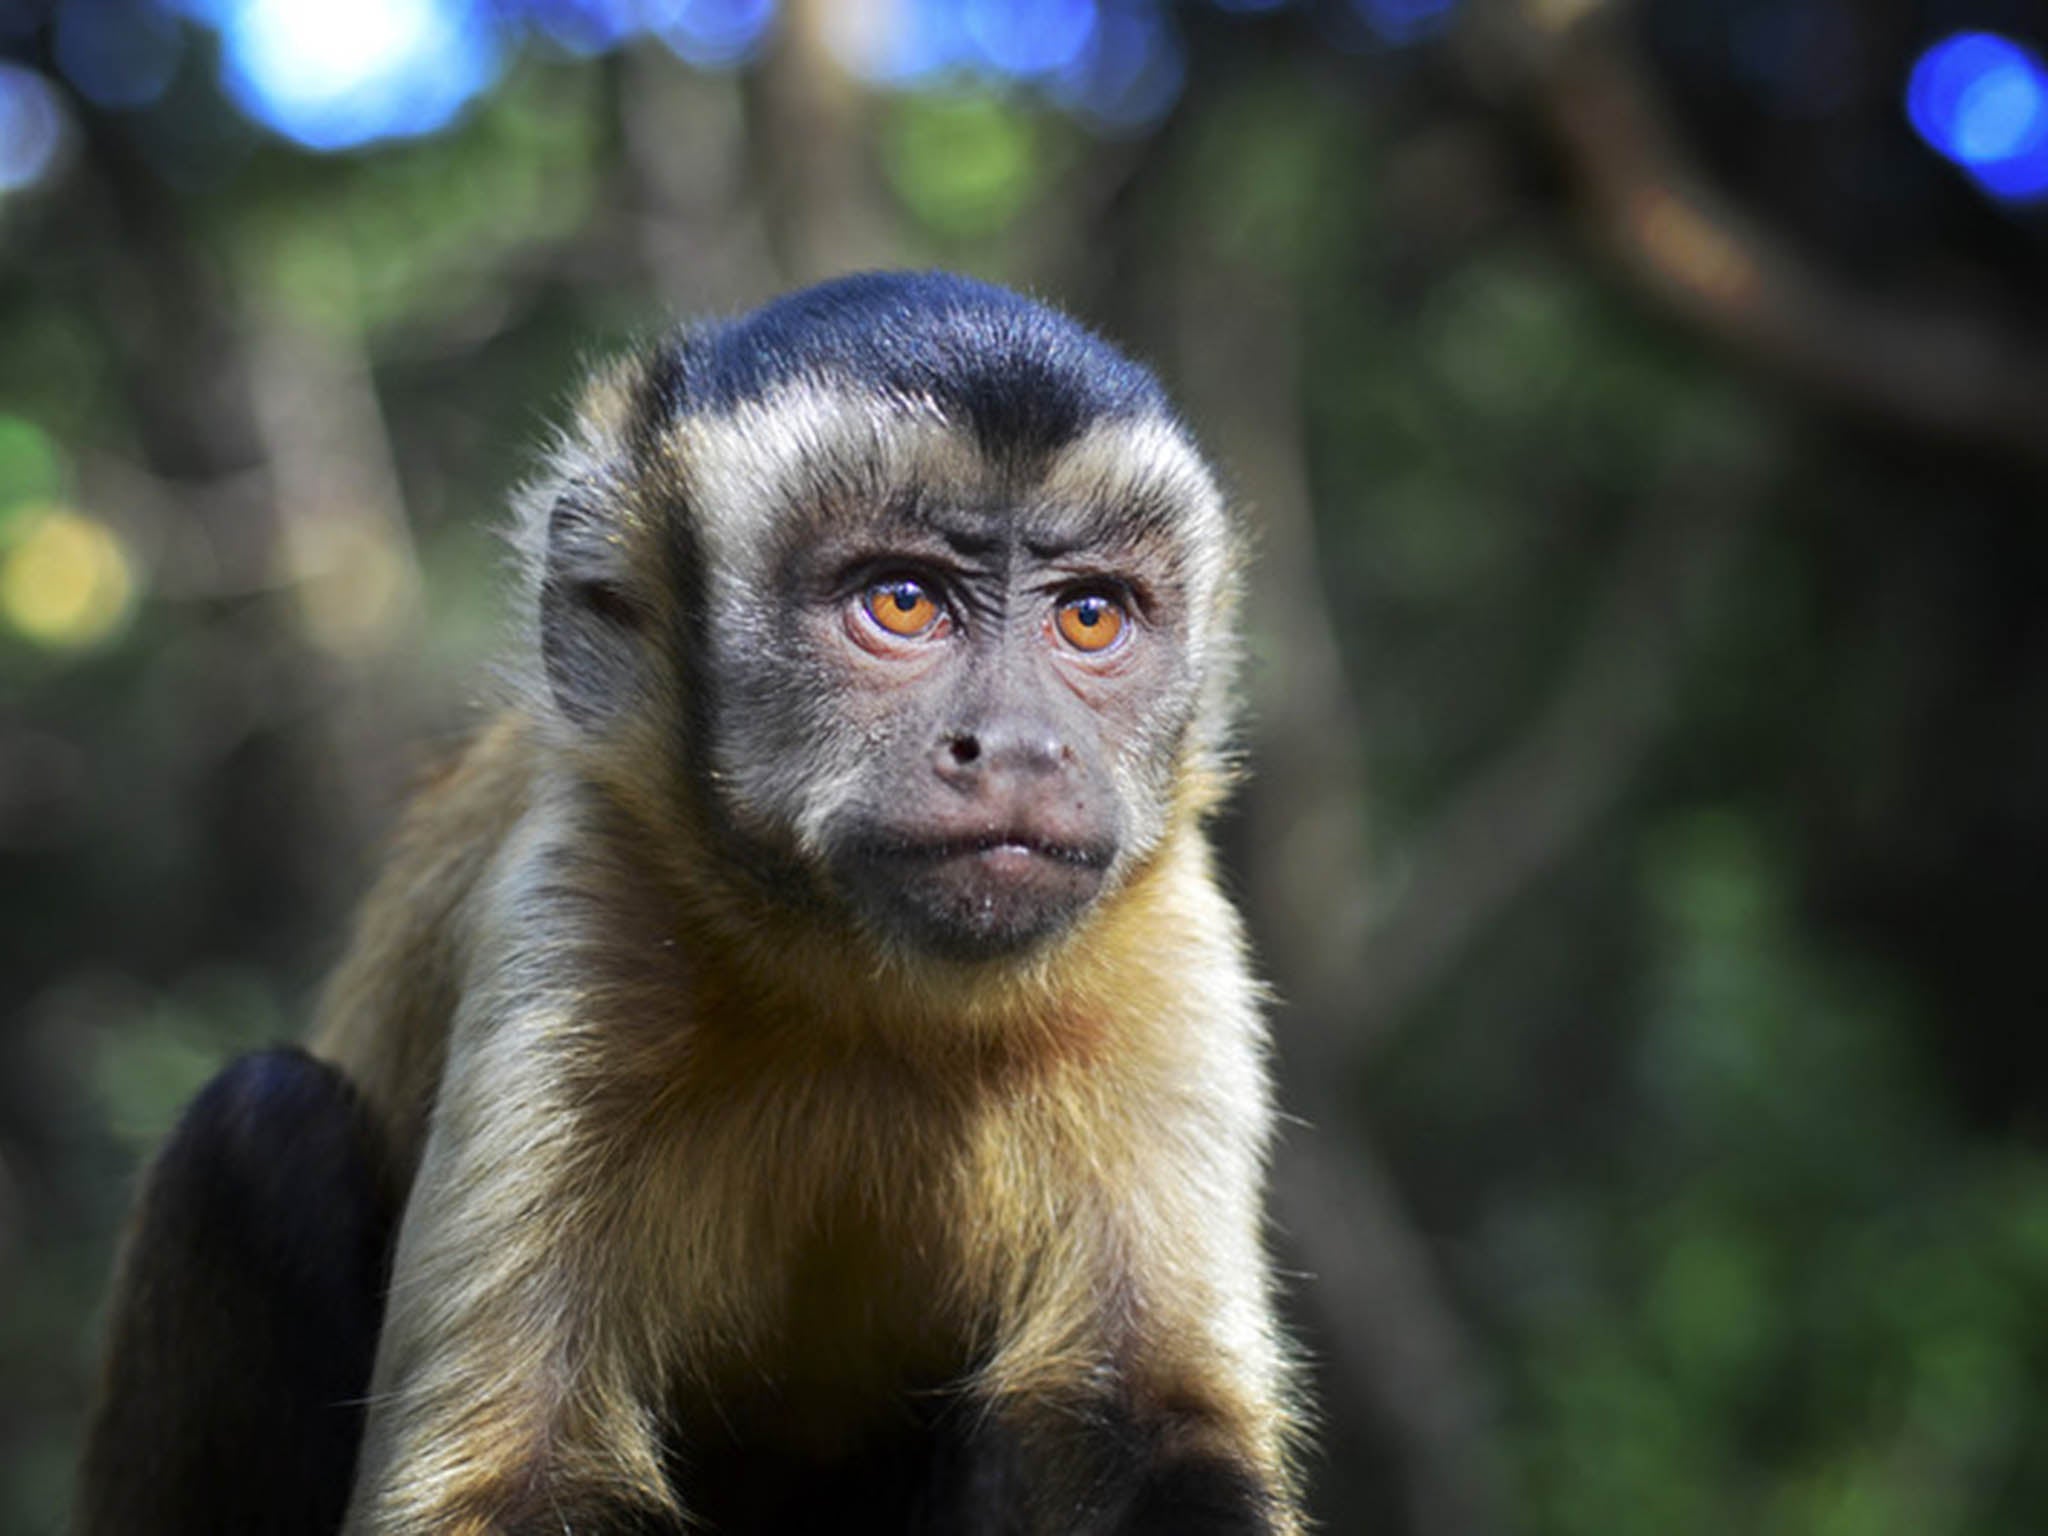 Capuchin monkeys went a bit bananas when they realised they were being rewarded unfairly